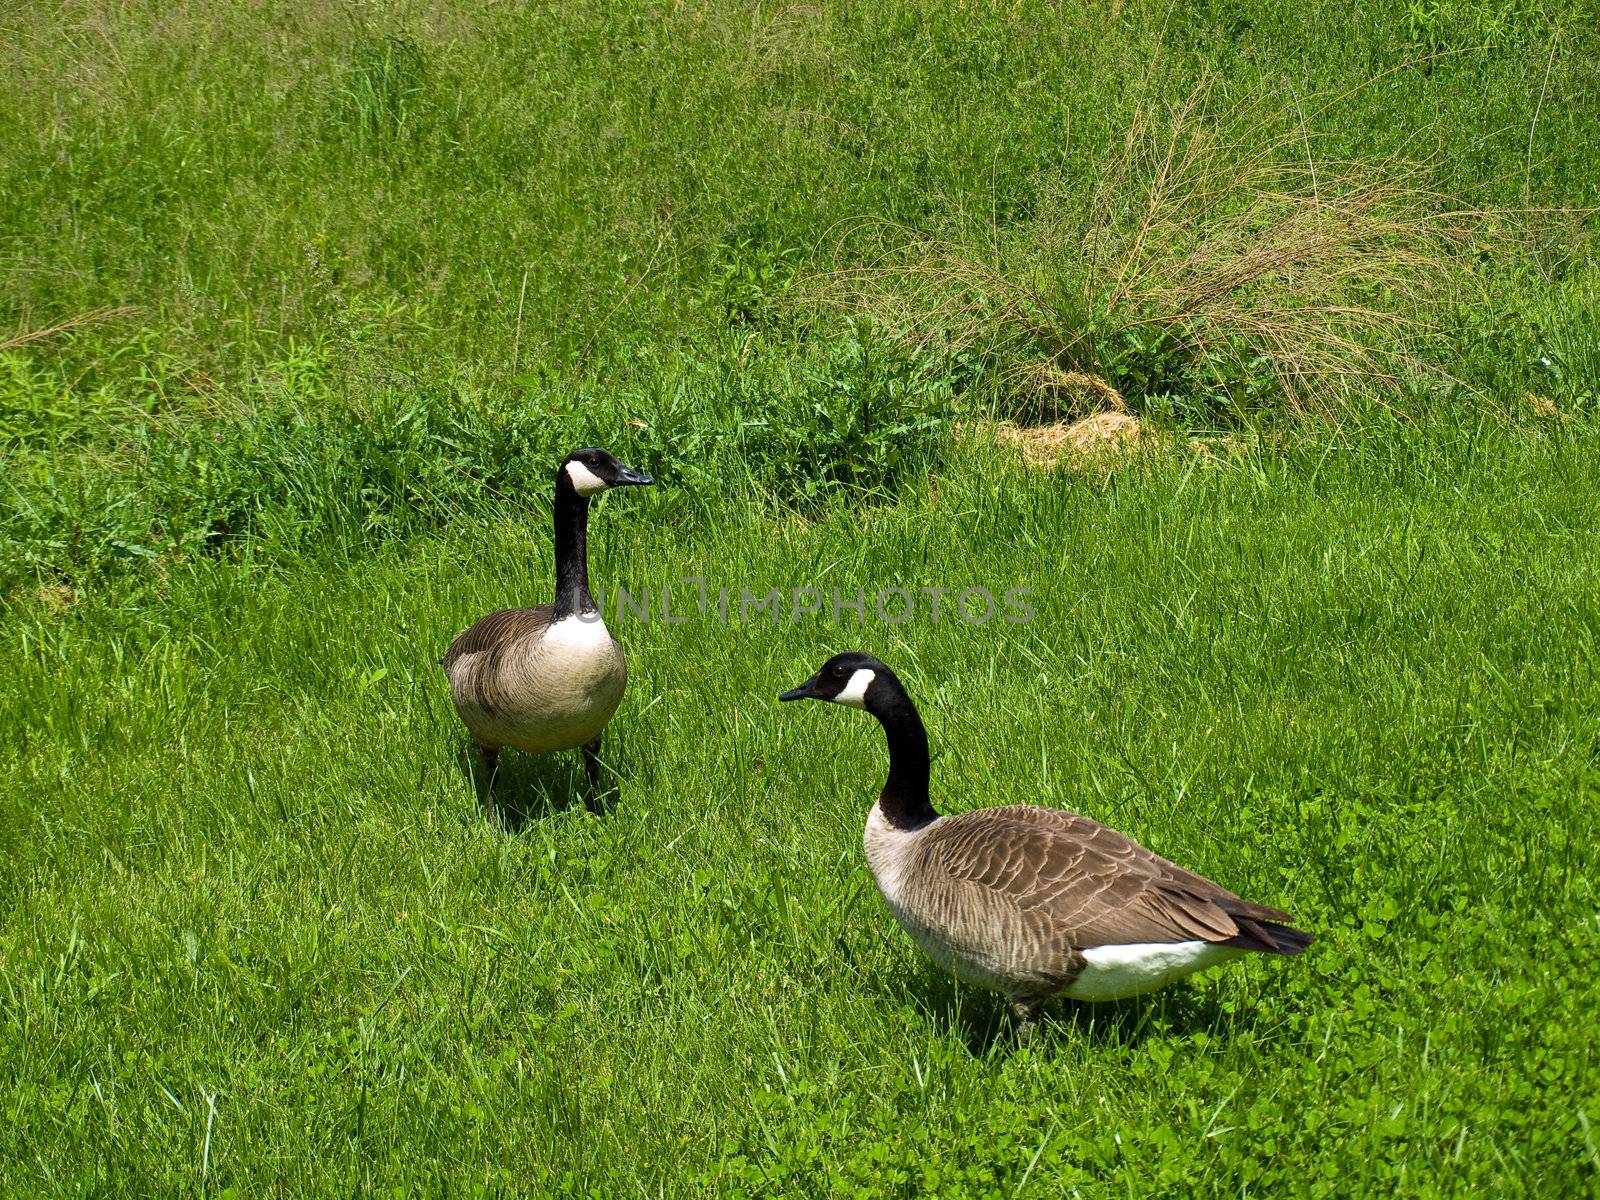 Two Canadian Geese in a Grassy Field